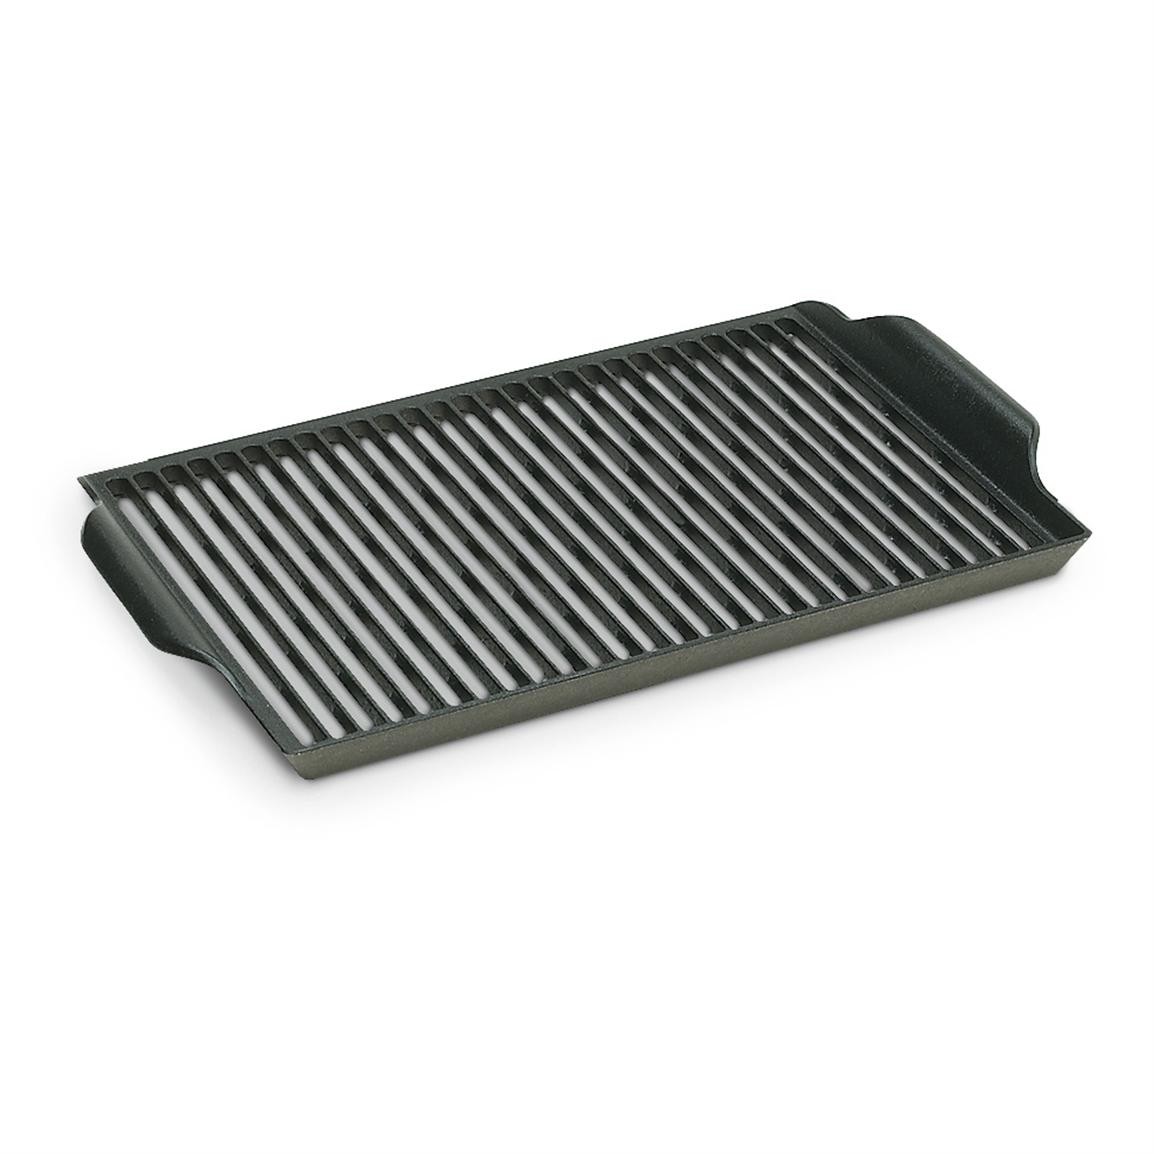 Lodge r cast iron barbecue grill 294006 cast iron at